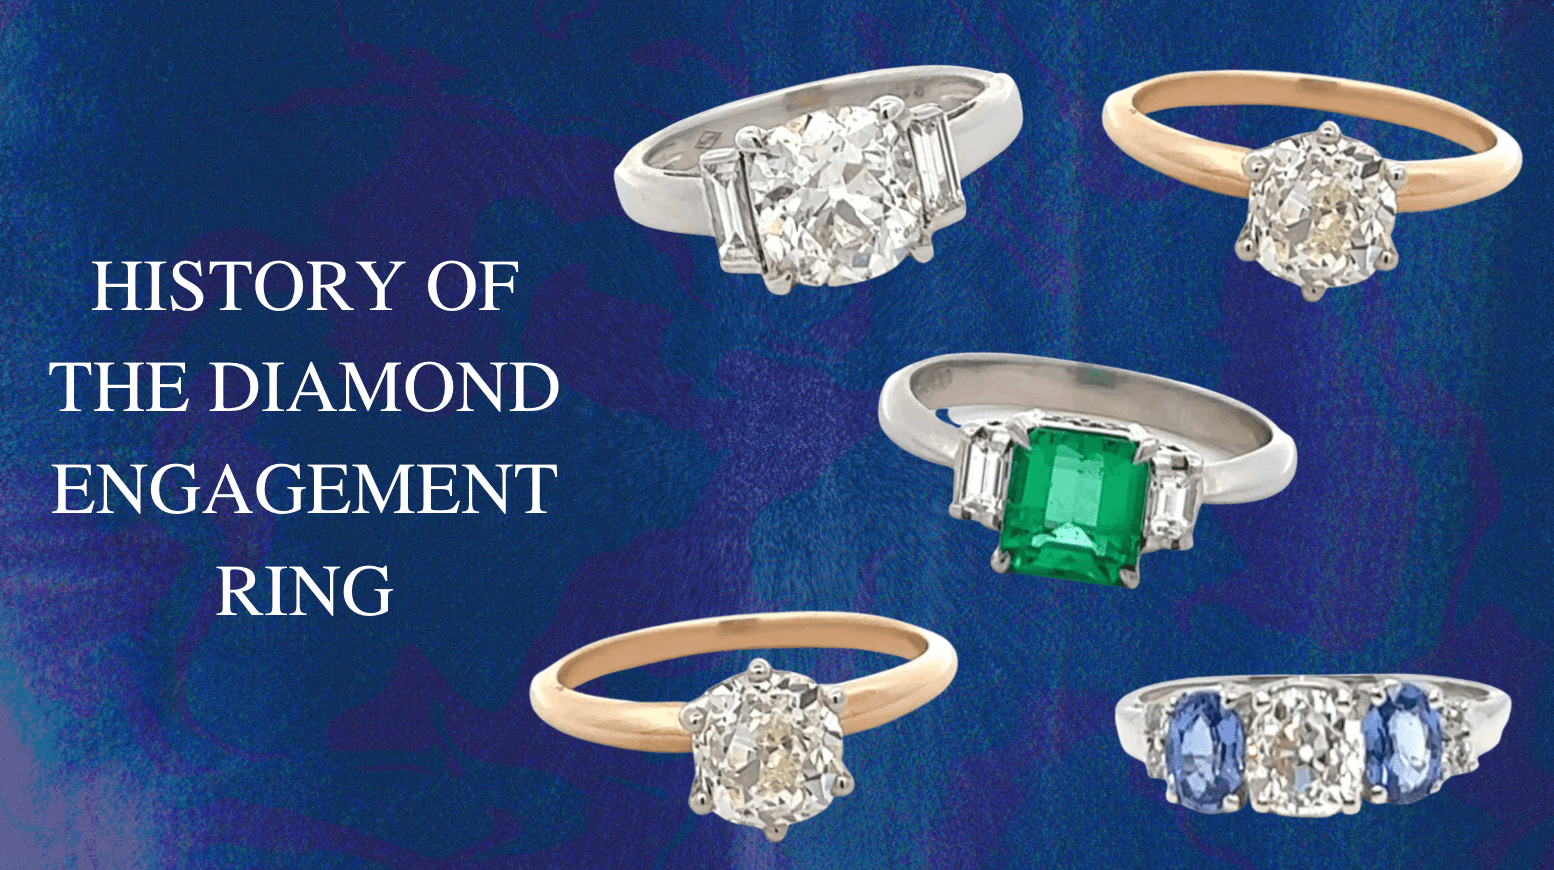 The History of the Diamond Engagement Ring - Jack Weir & Sons